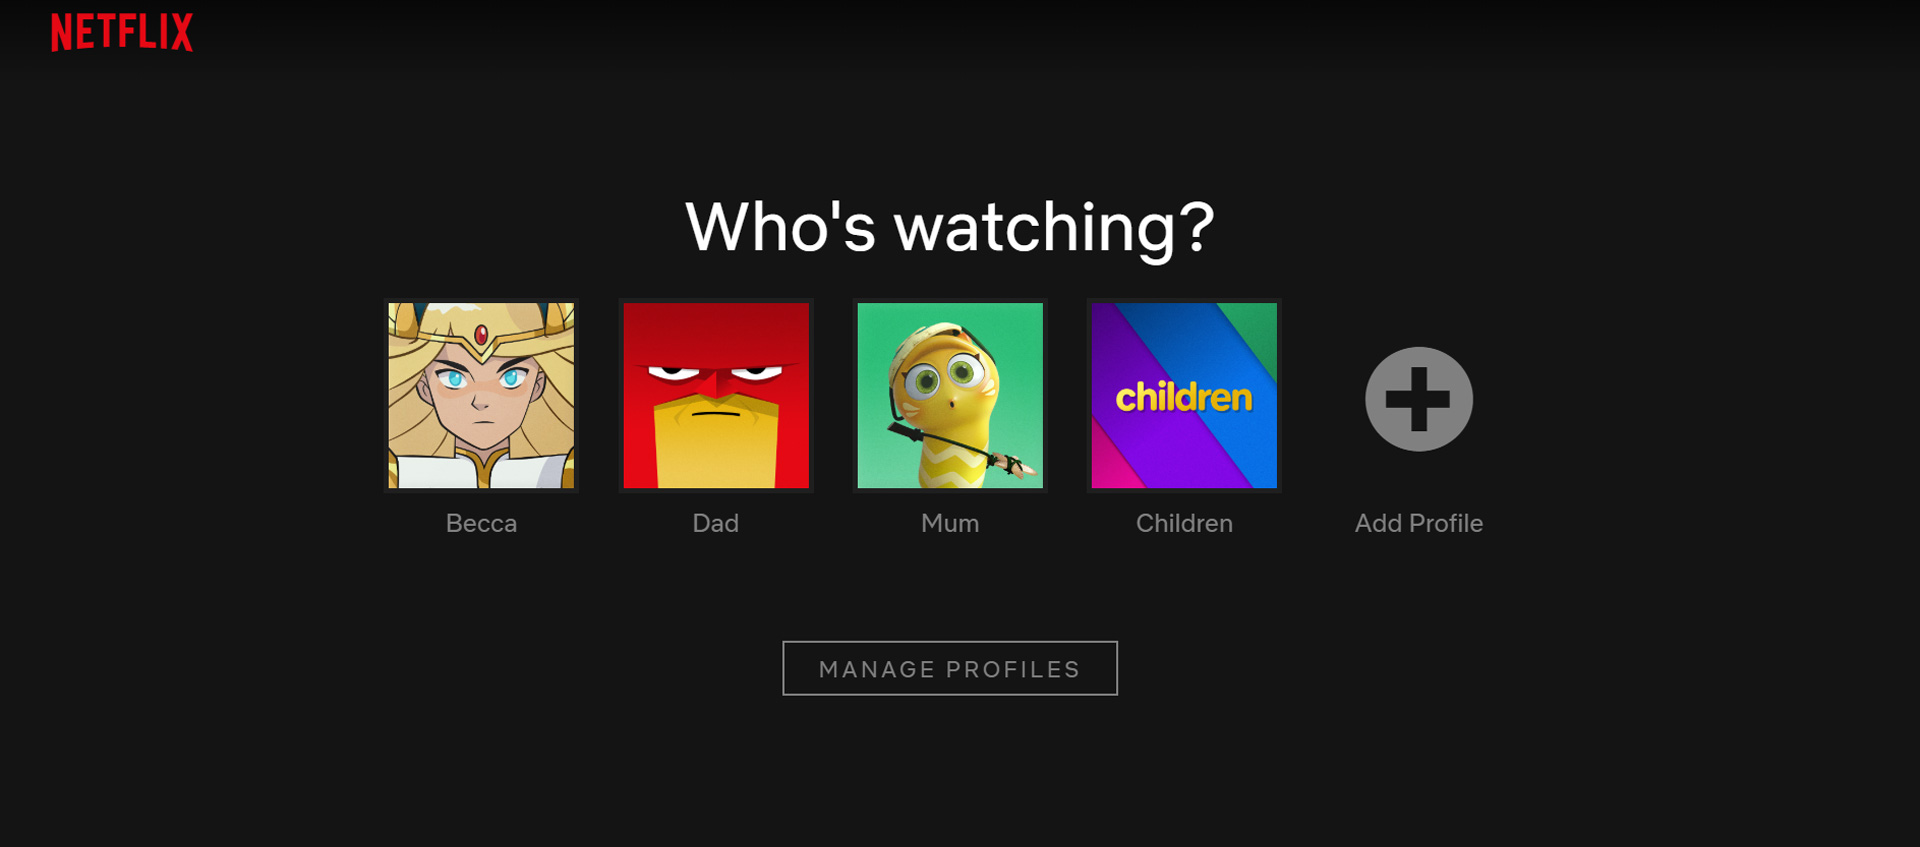 How to delete a profile on Netflix?